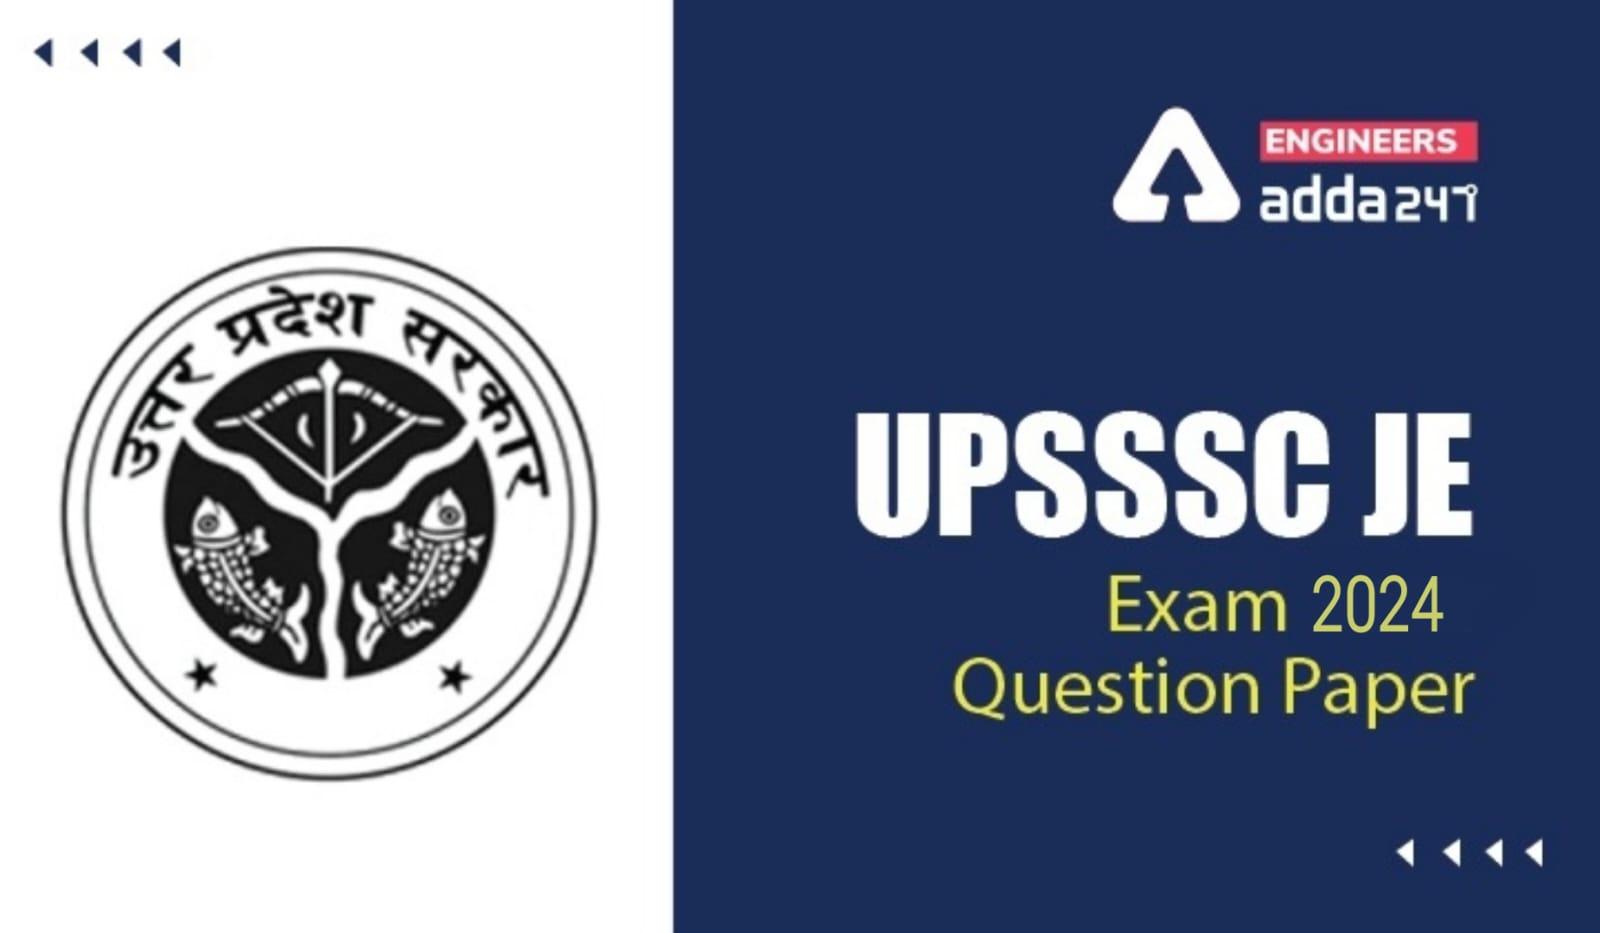 UPSSSC JE Exam 2024 Question Paper, Check First Impression And